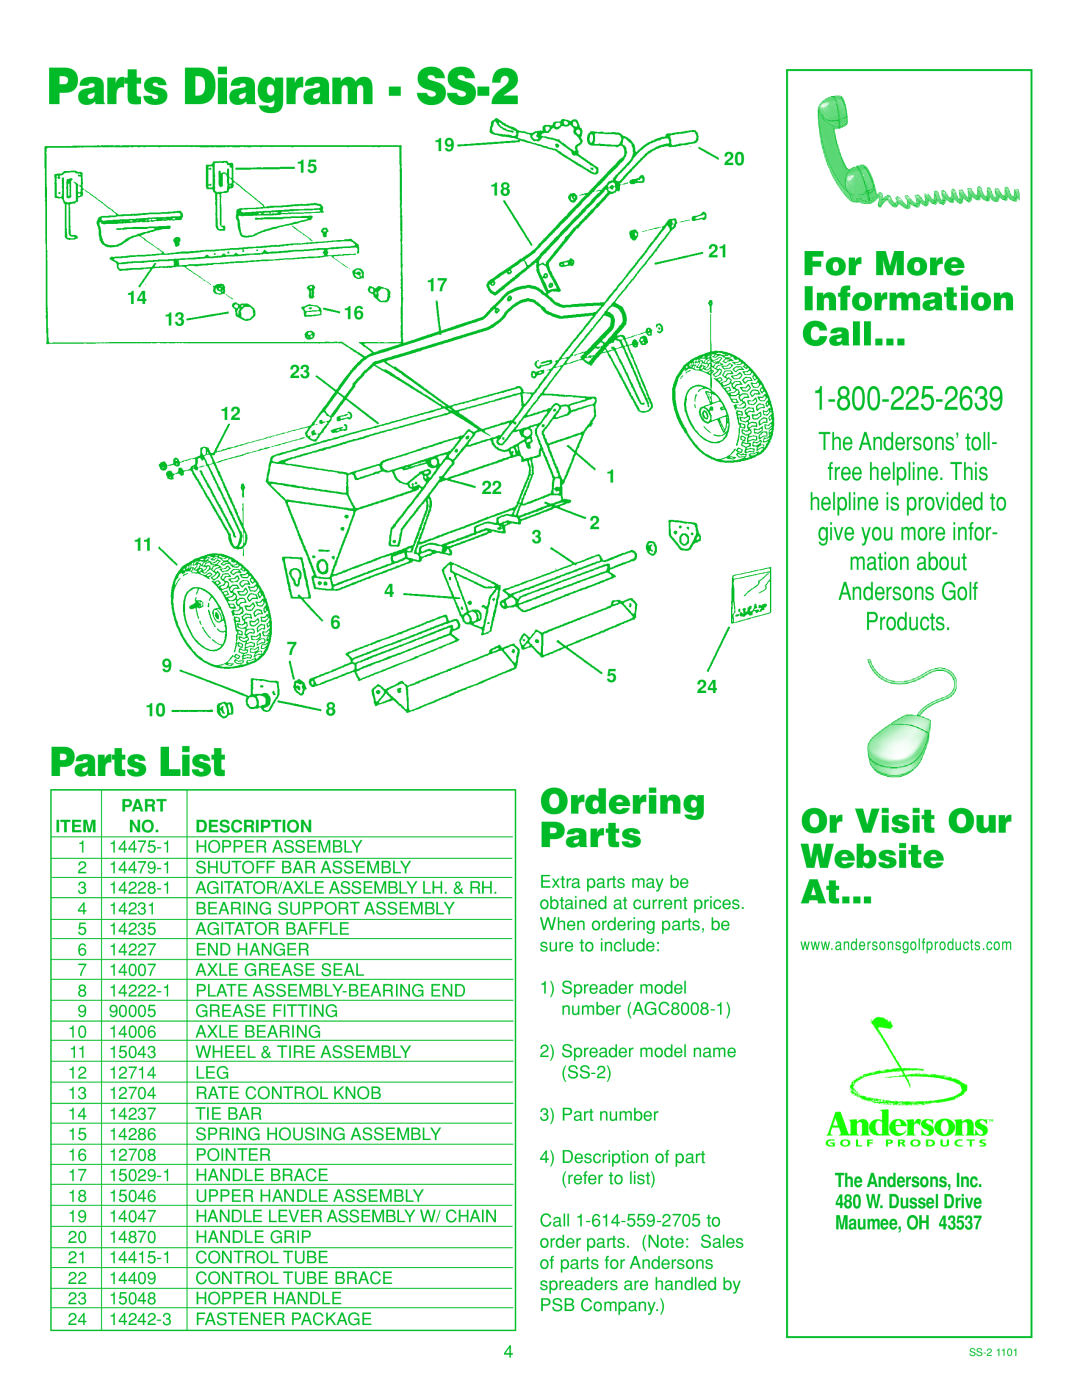 Anderson Manufacturing Ordering Parts, For More, Information, Call, Or Visit Our Website At, Parts Diagram - SS-2, 1316 